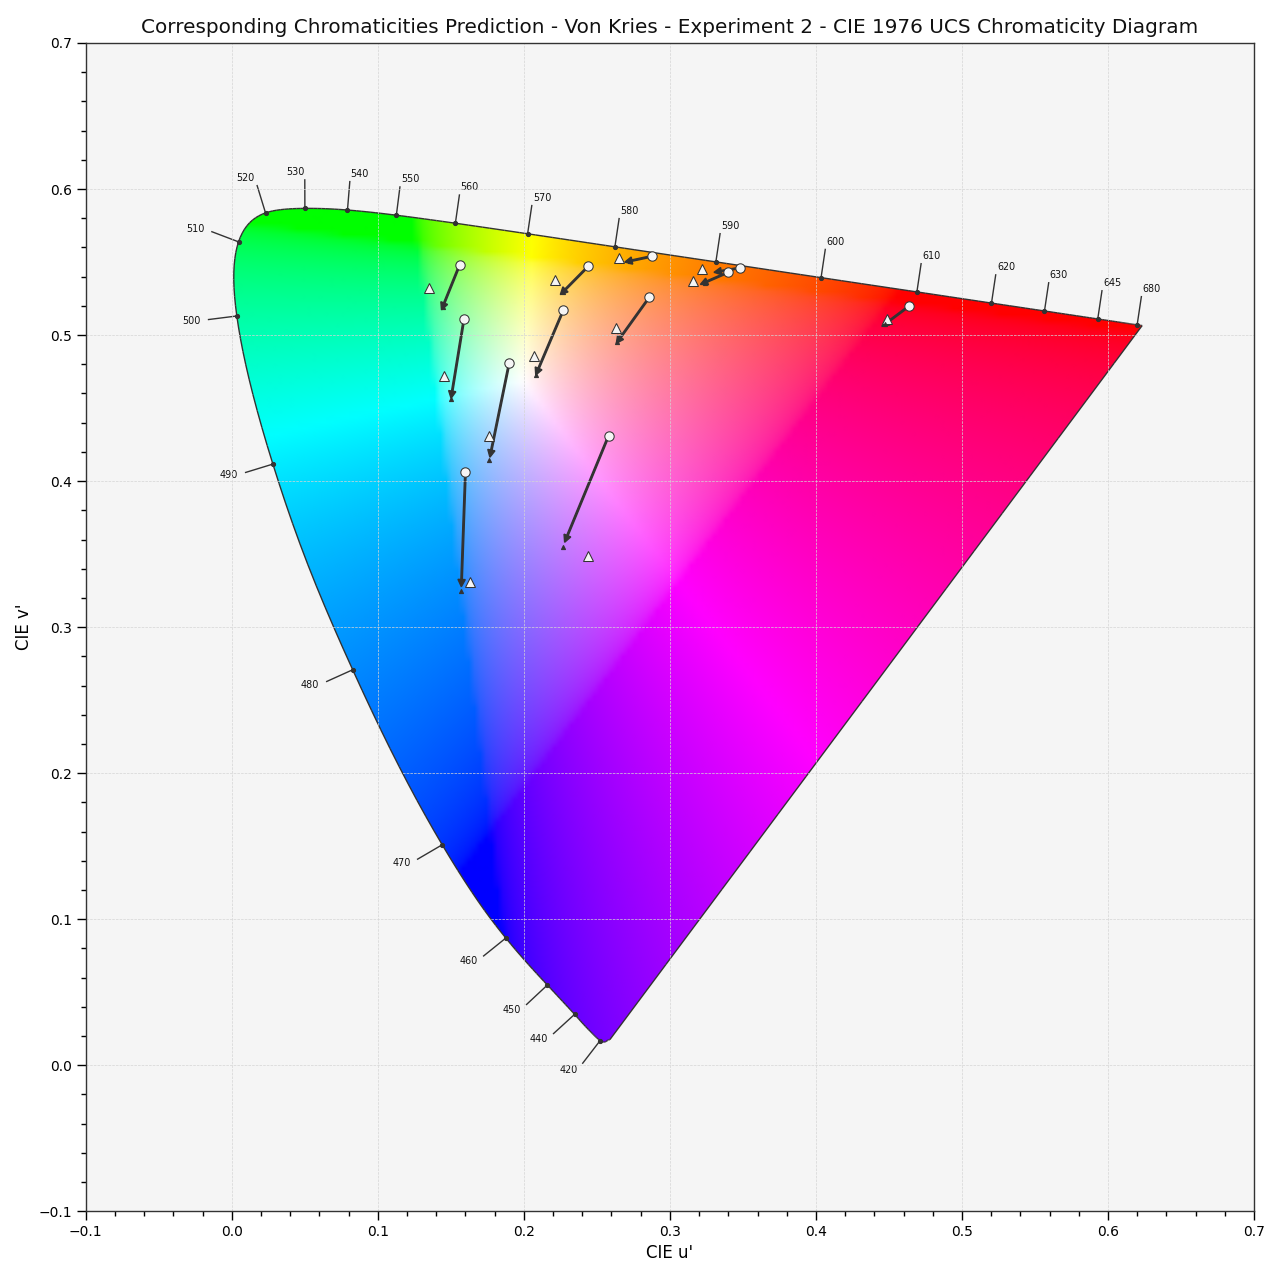 https://colour.readthedocs.io/en/develop/_images/Examples_Plotting_Chromaticities_Prediction.png